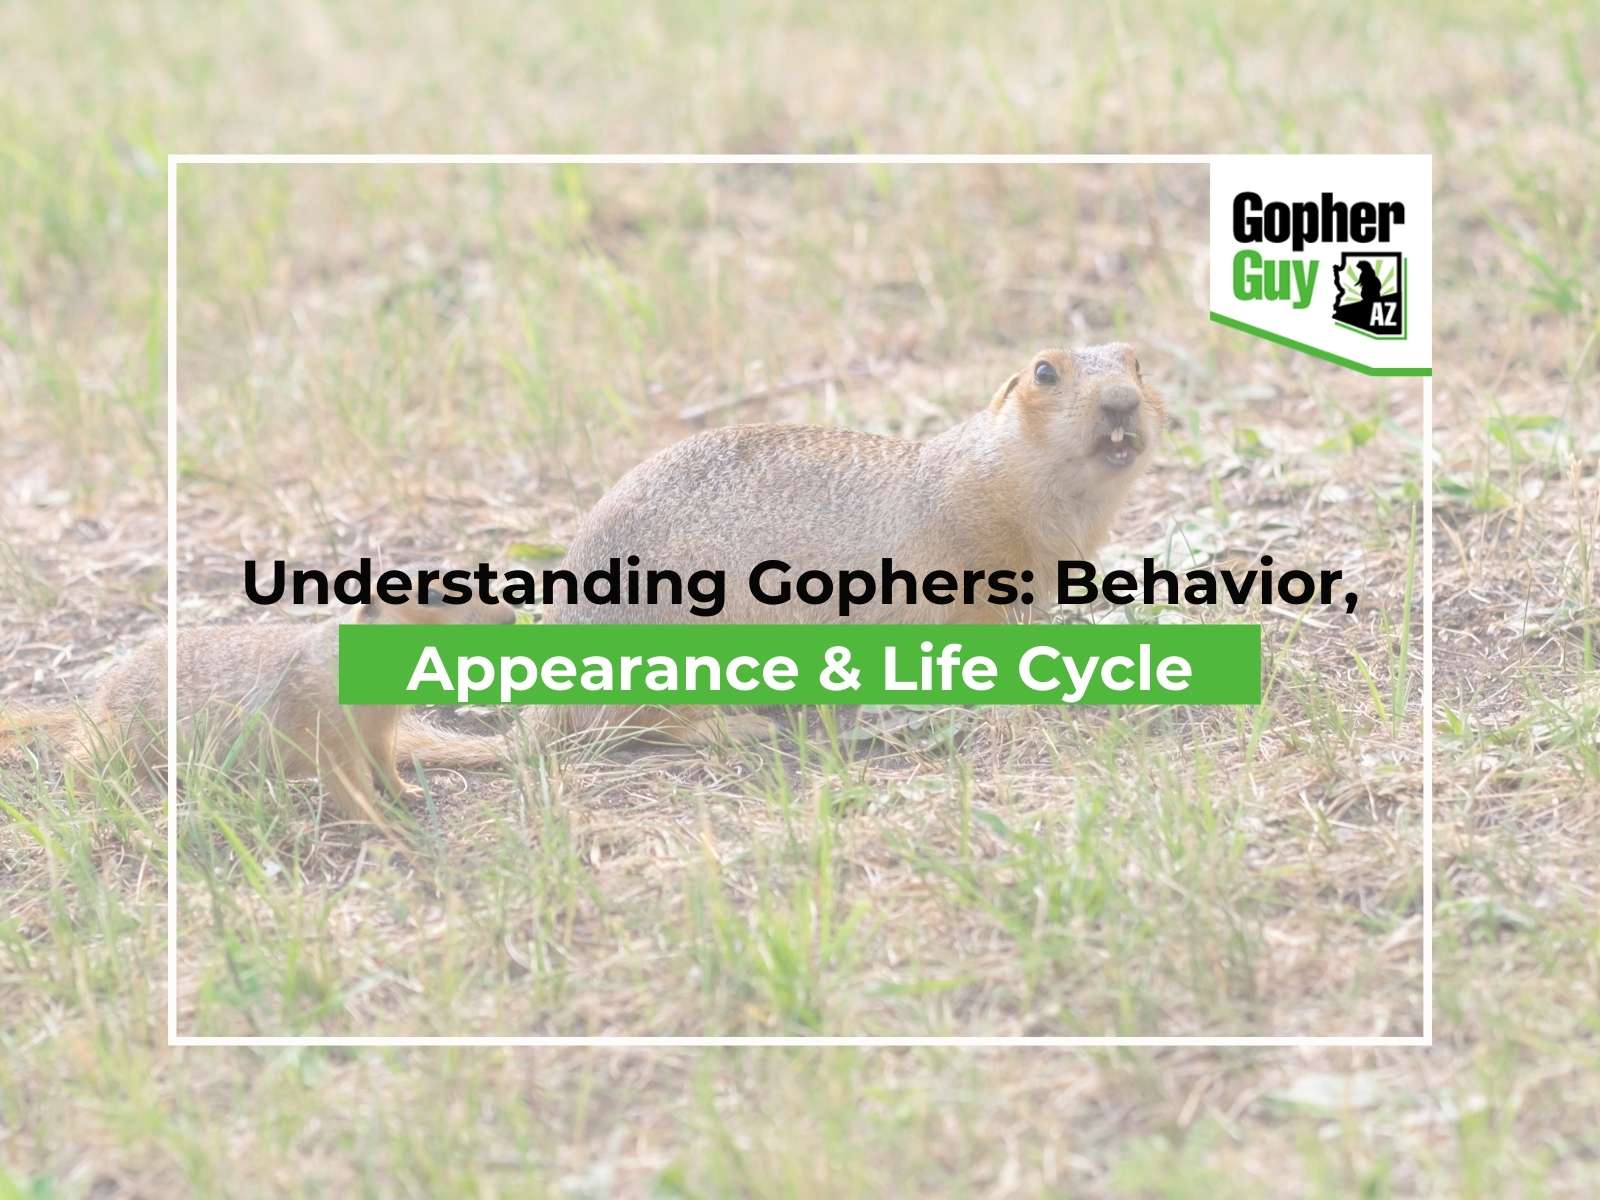 Understanding Gophers Behavior, Appearance & Life Cycle